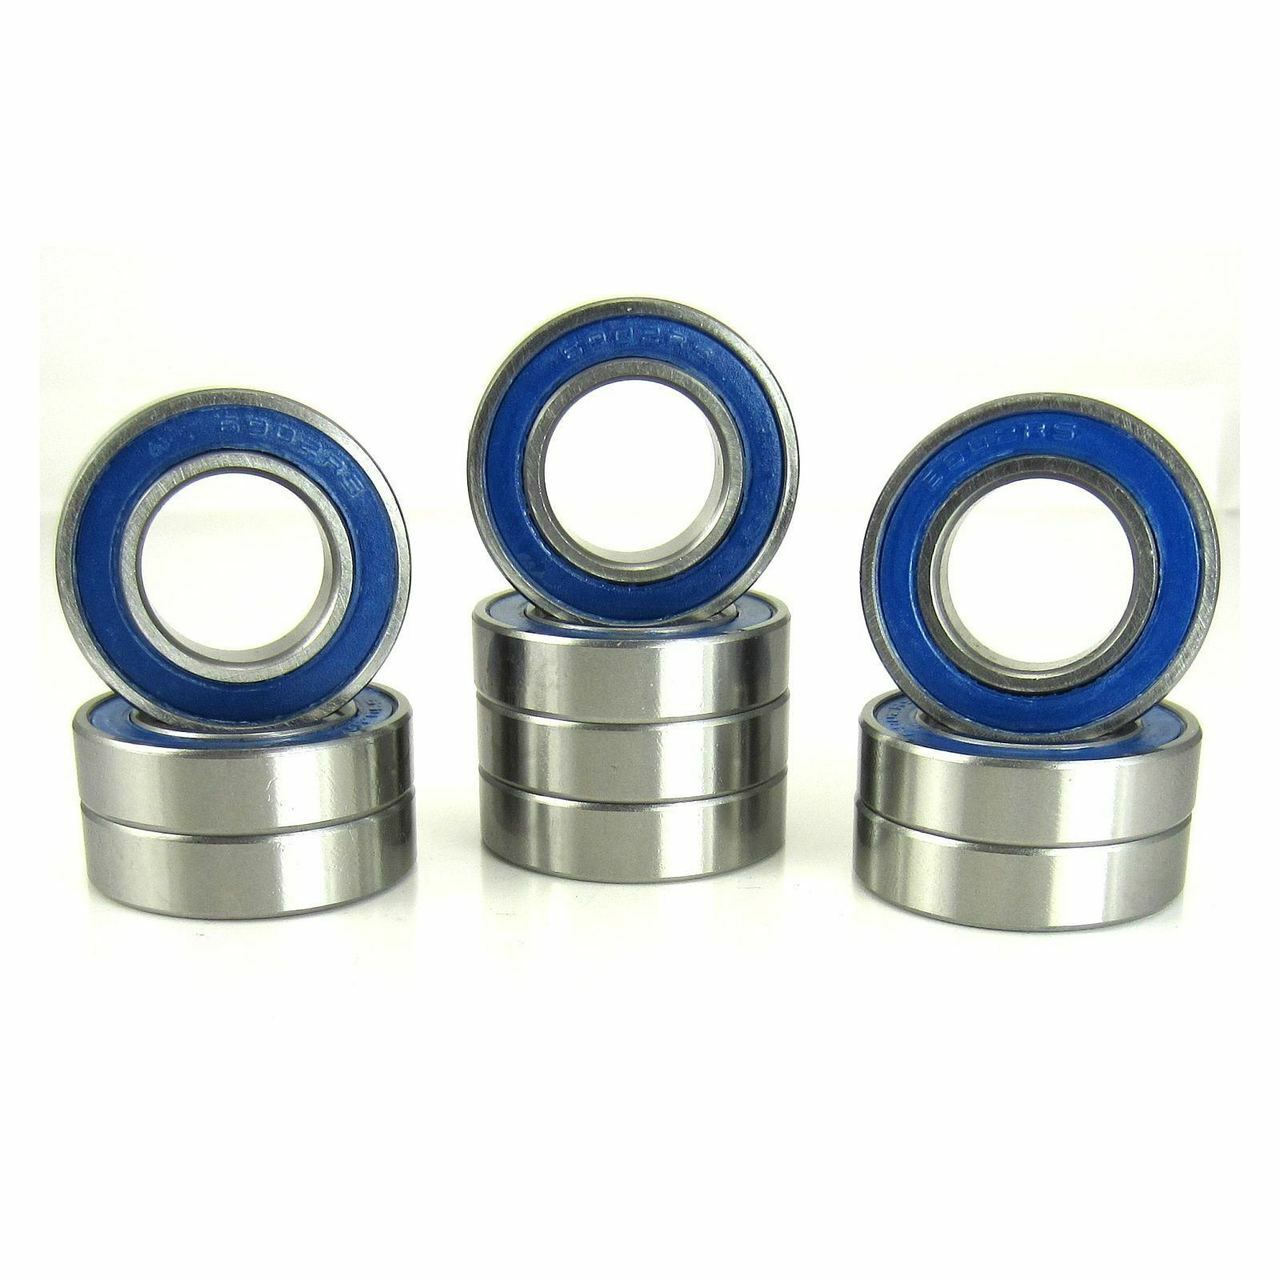 6902-2RS 15x28x7mm Precision High Speed RC Ball Bearing, Chrome Steel (GCr15) with Blue Rubber Seals ABEC-1 ABEC-3 ABEC-5